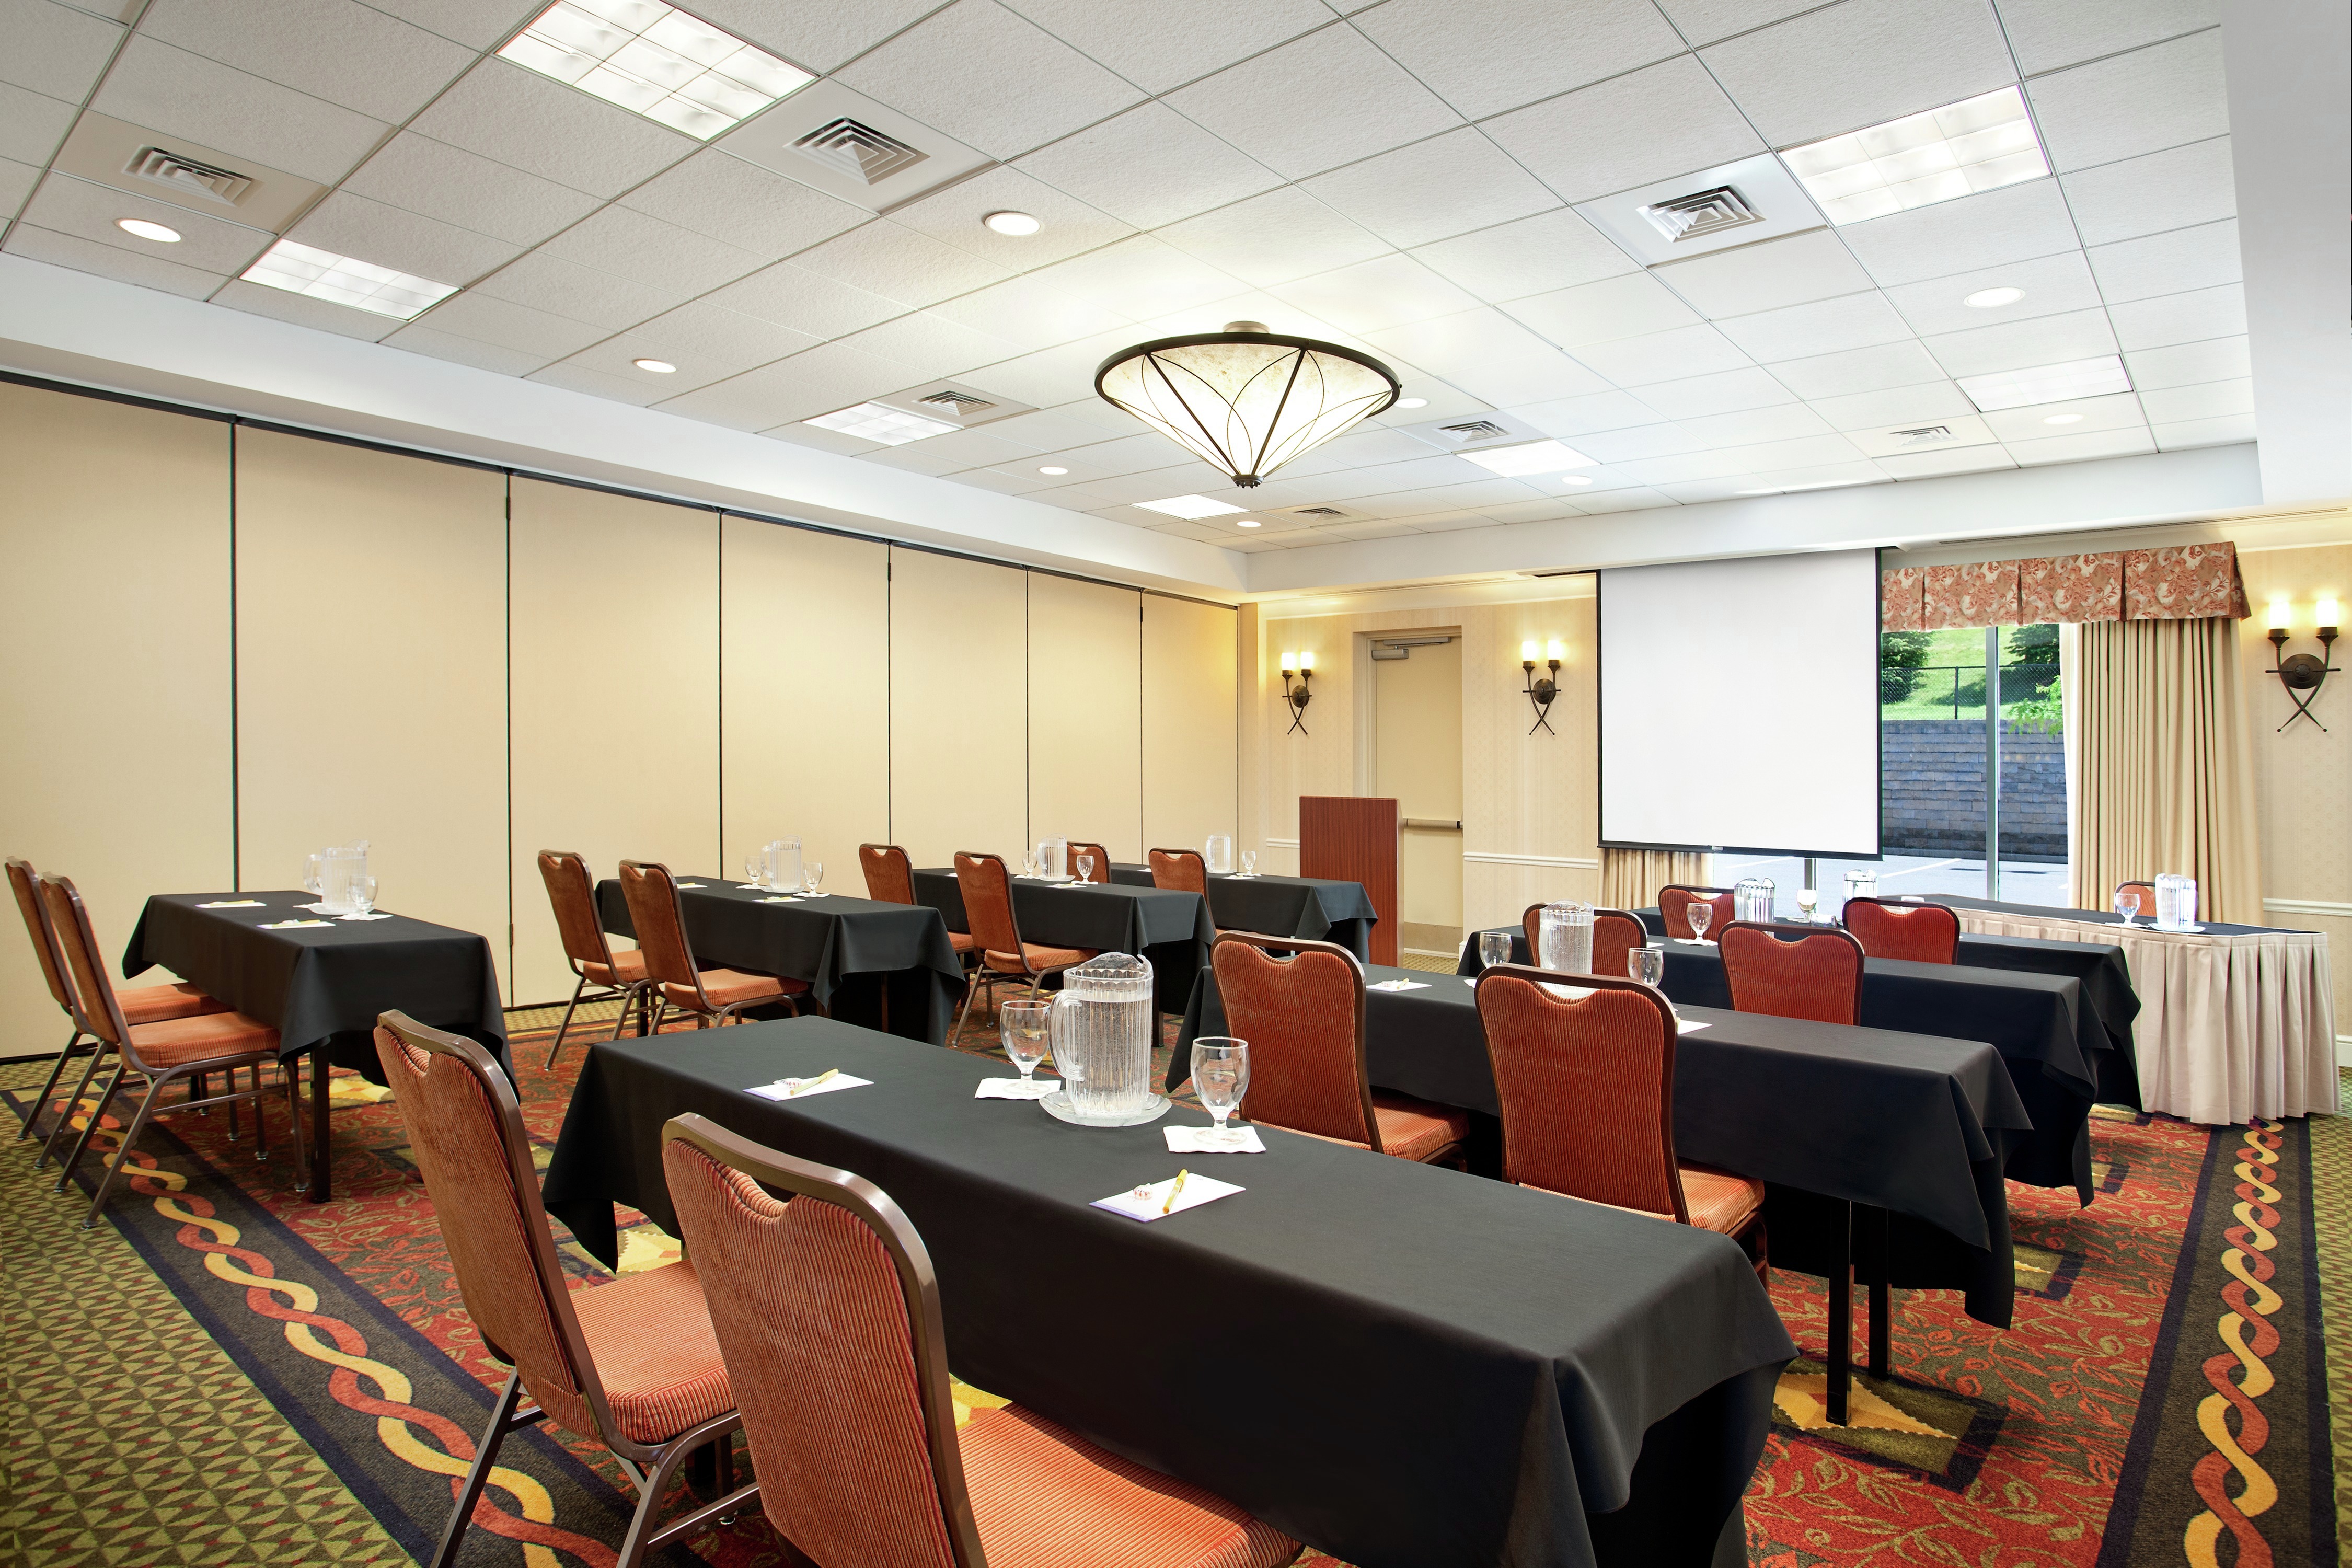 Classroom Setup in Meeting Room With Tables and Chairs Facing Presentation Screen and Window With Open Drapes